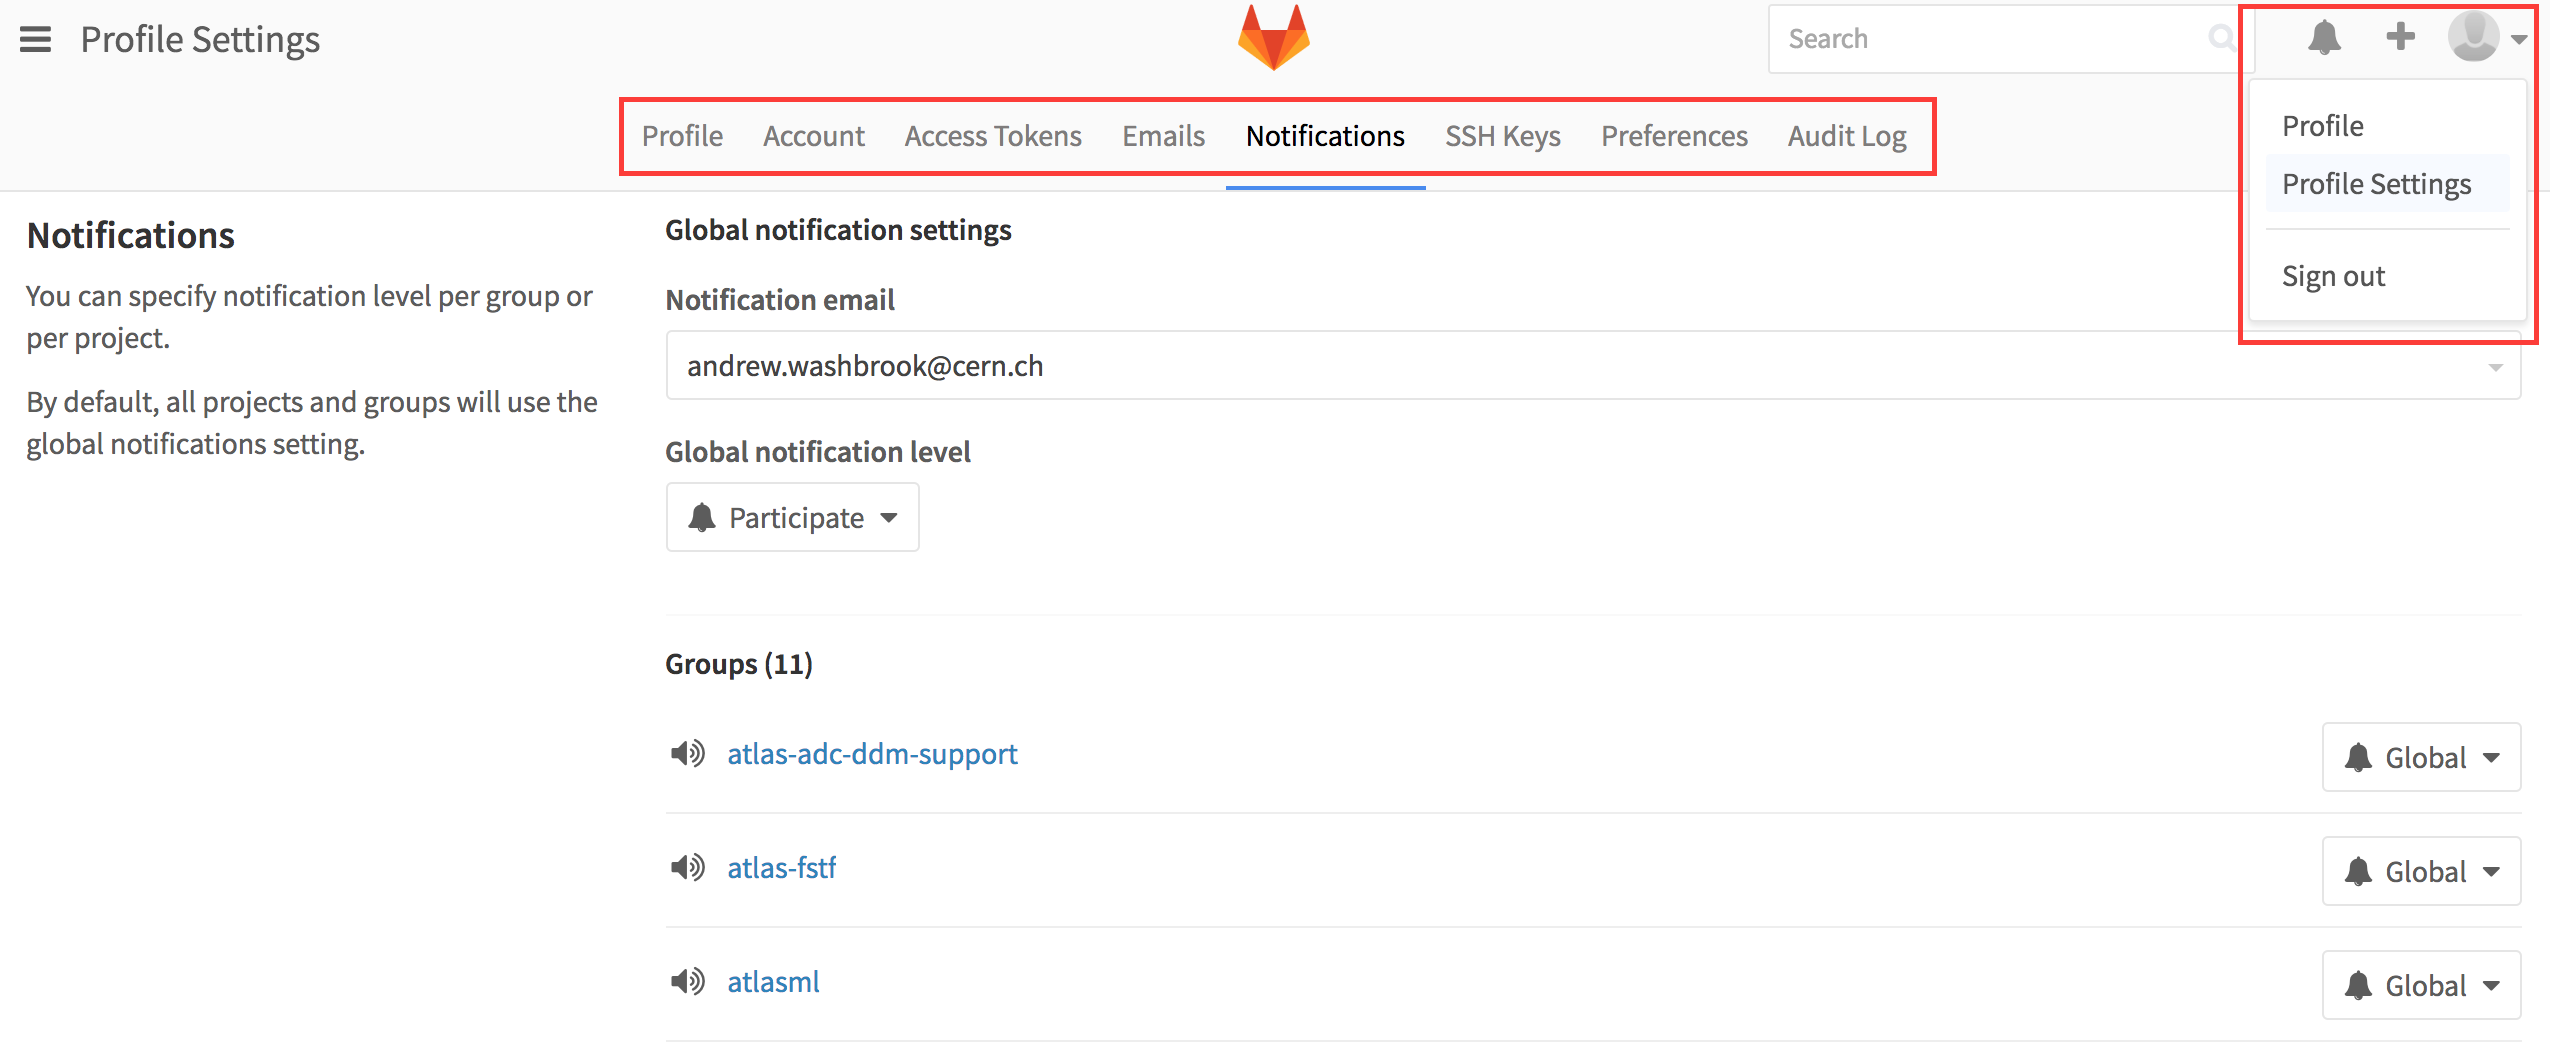 GitLab project front page